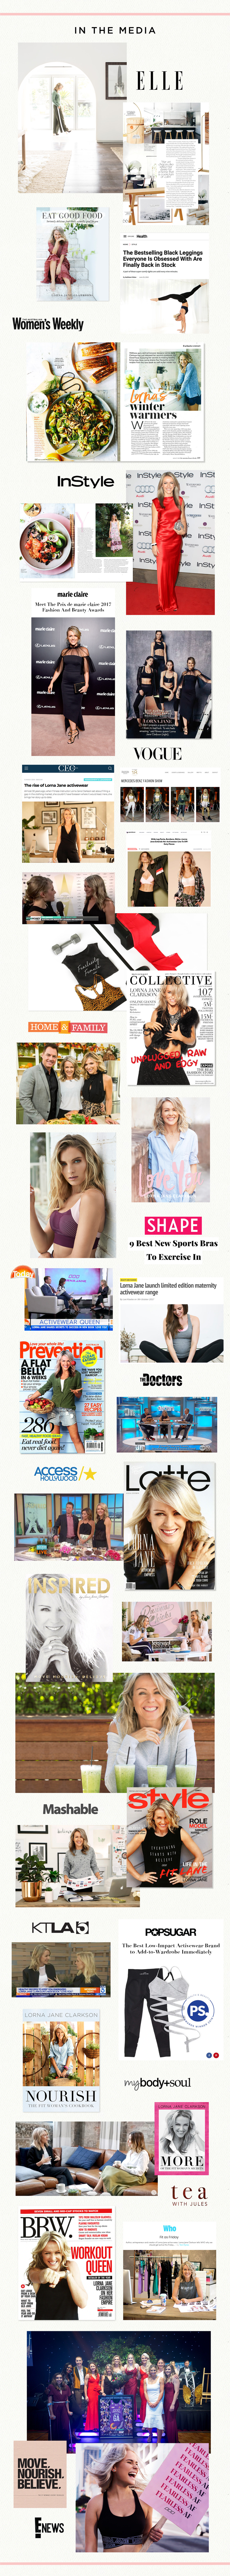 lorna-jane-active-wear-in-the-media-magazine-articles